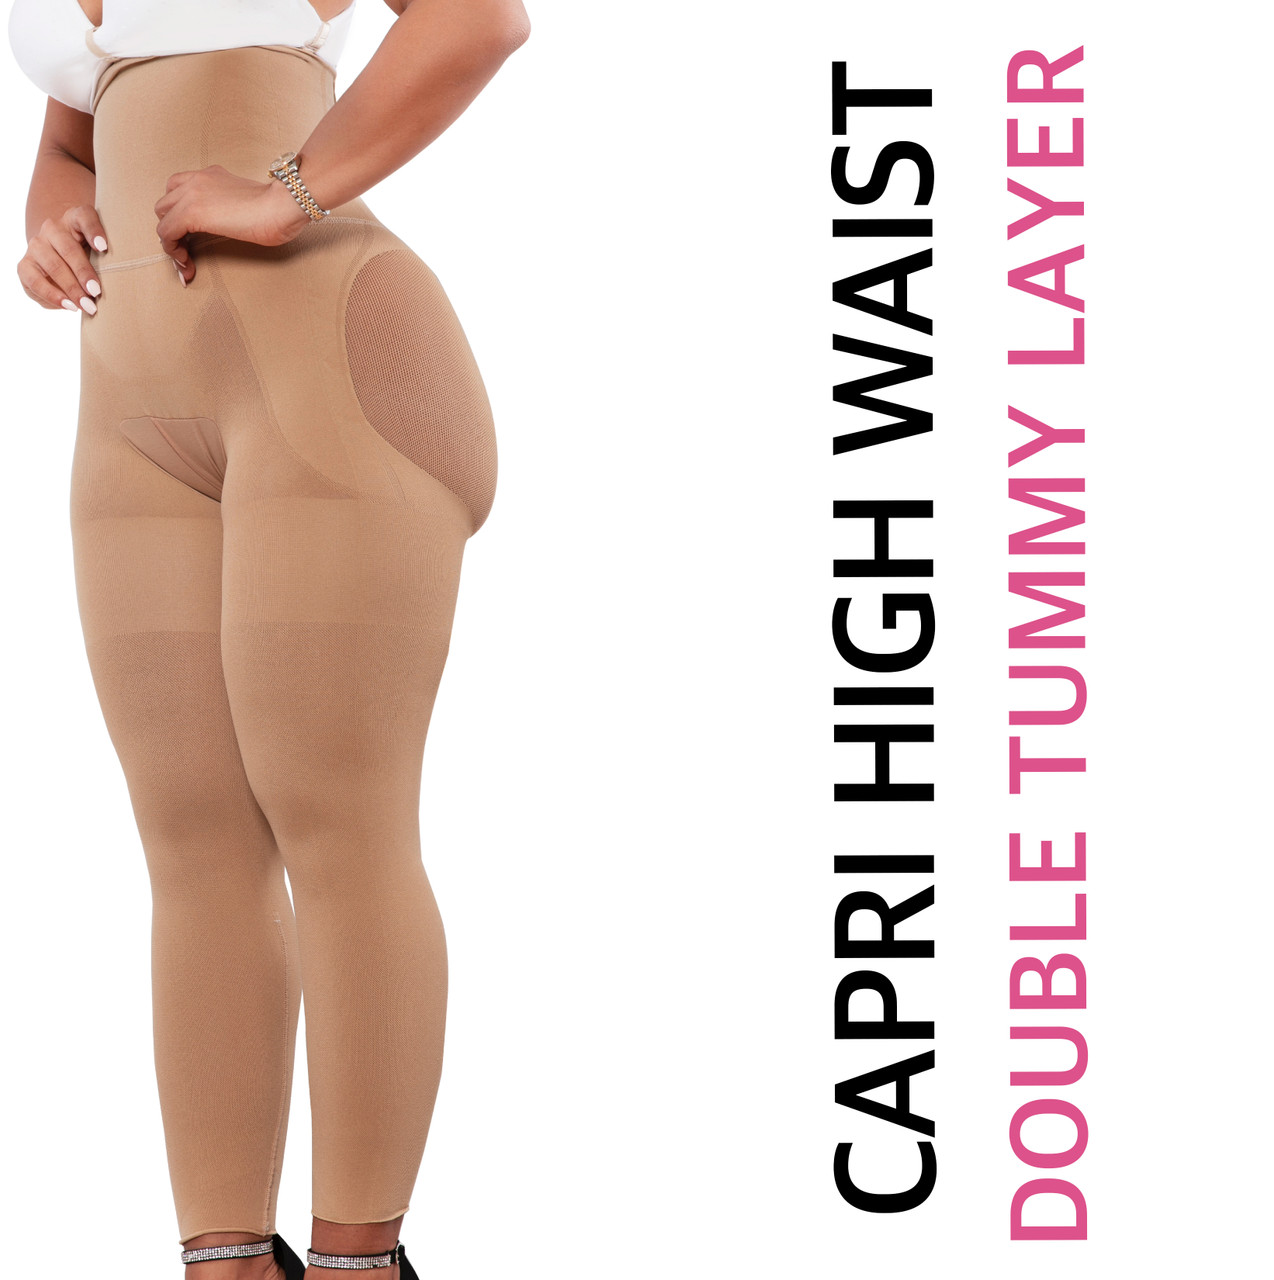 New Ways to Style a Shapewear - Low Back Body Shaper Trend for Summer -  Narasi Nia - A Lifestyle & Special Needs Blog